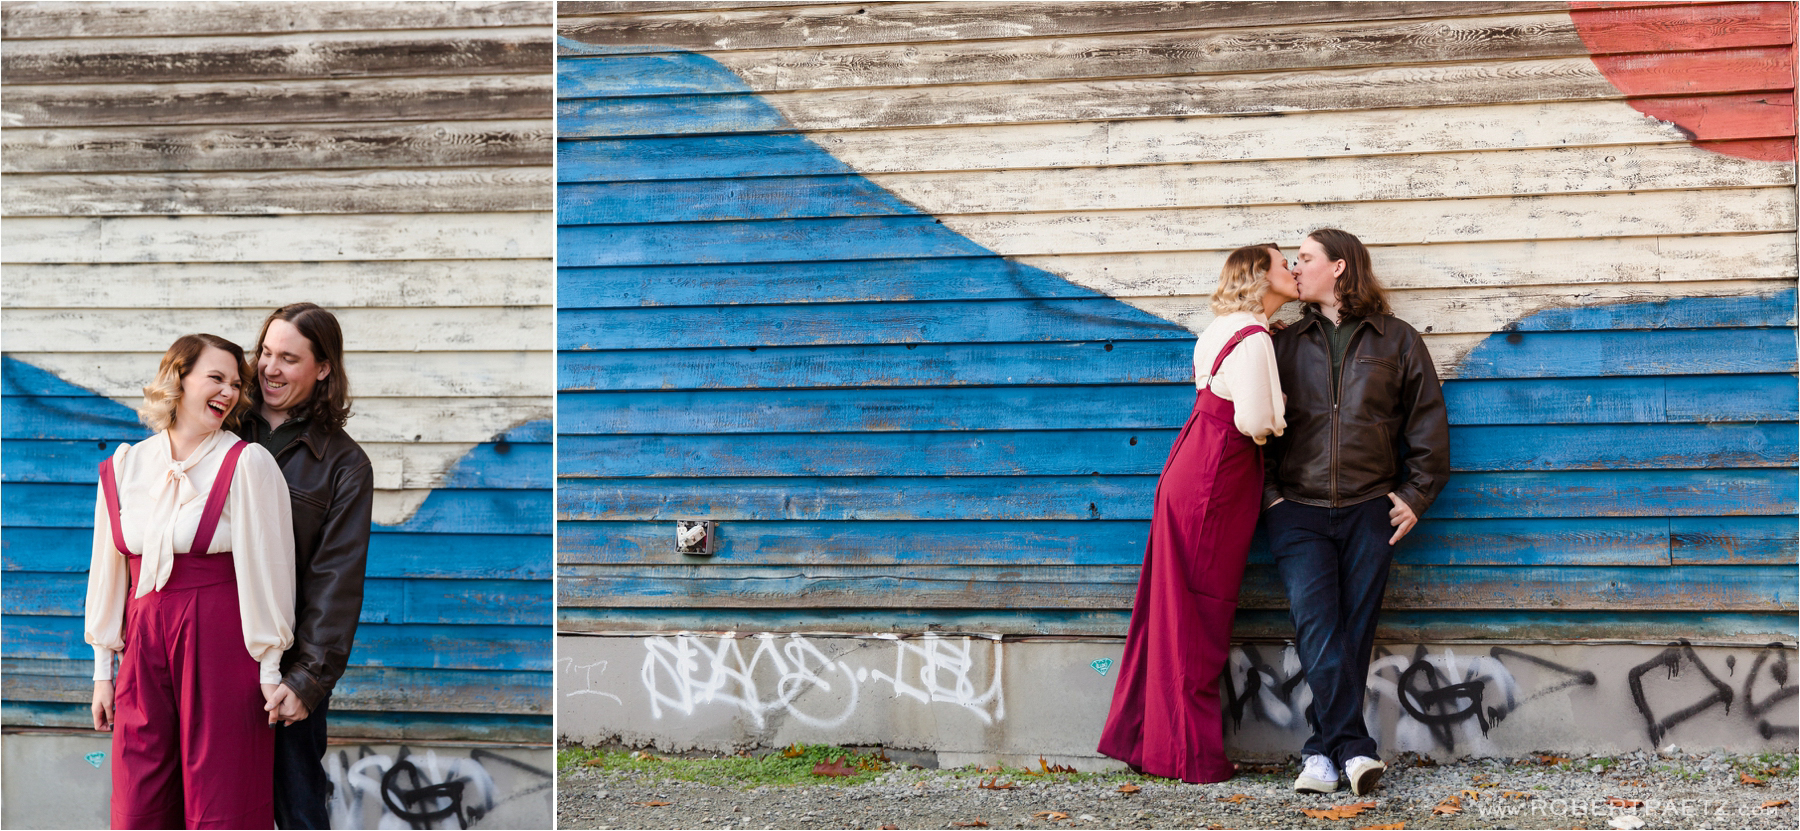 An engagement session in the Seattle neighborhood of Ballard, photographed by the destination wedding photographer, Robert Paetz.